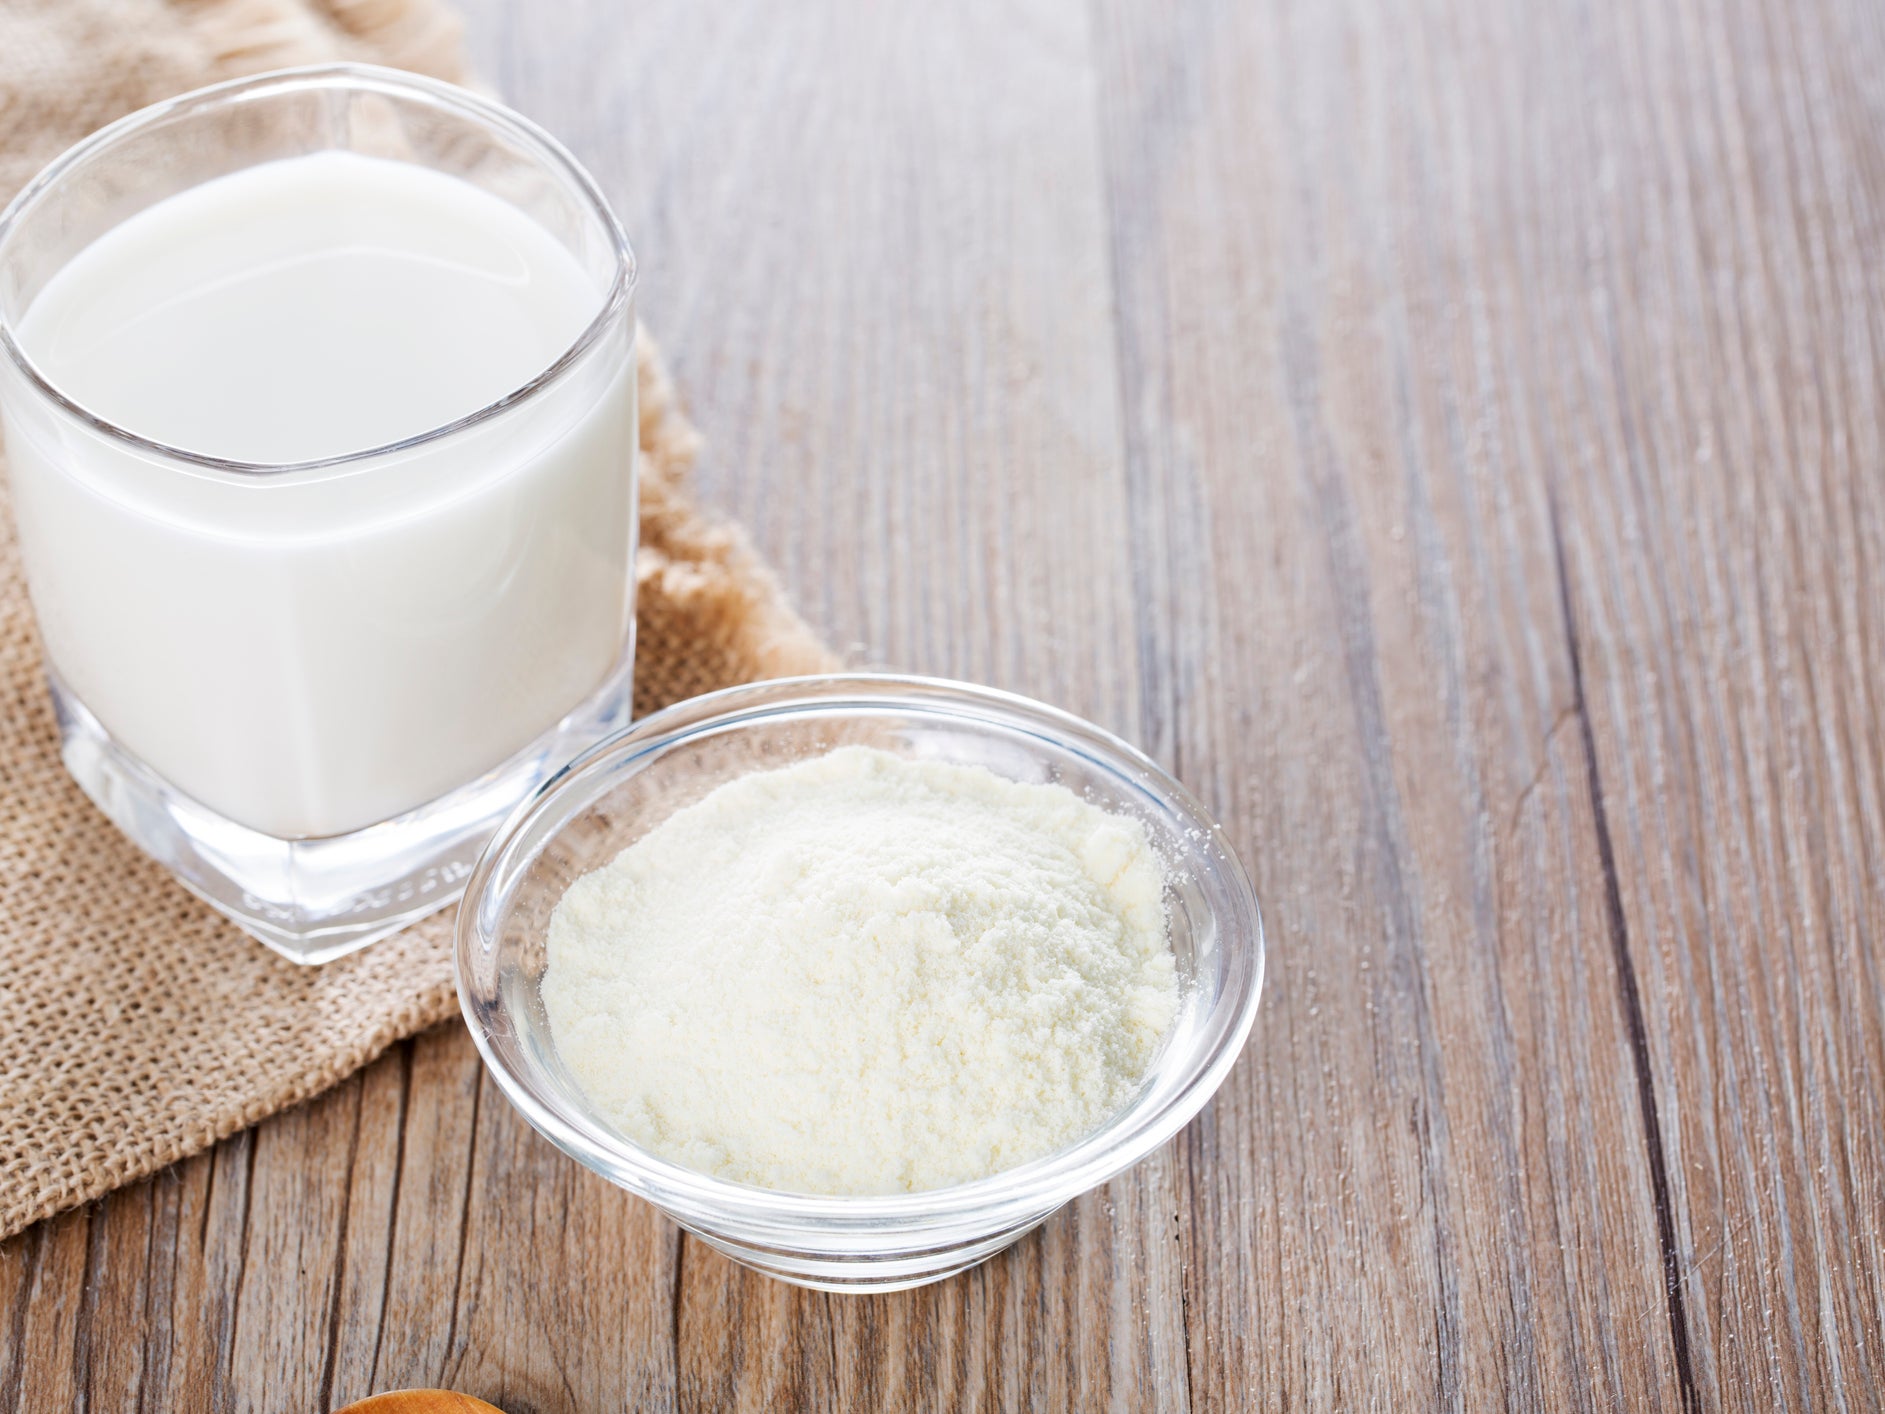 Lab tests showed the man's suspicious-looking white substance was actually powdered milk